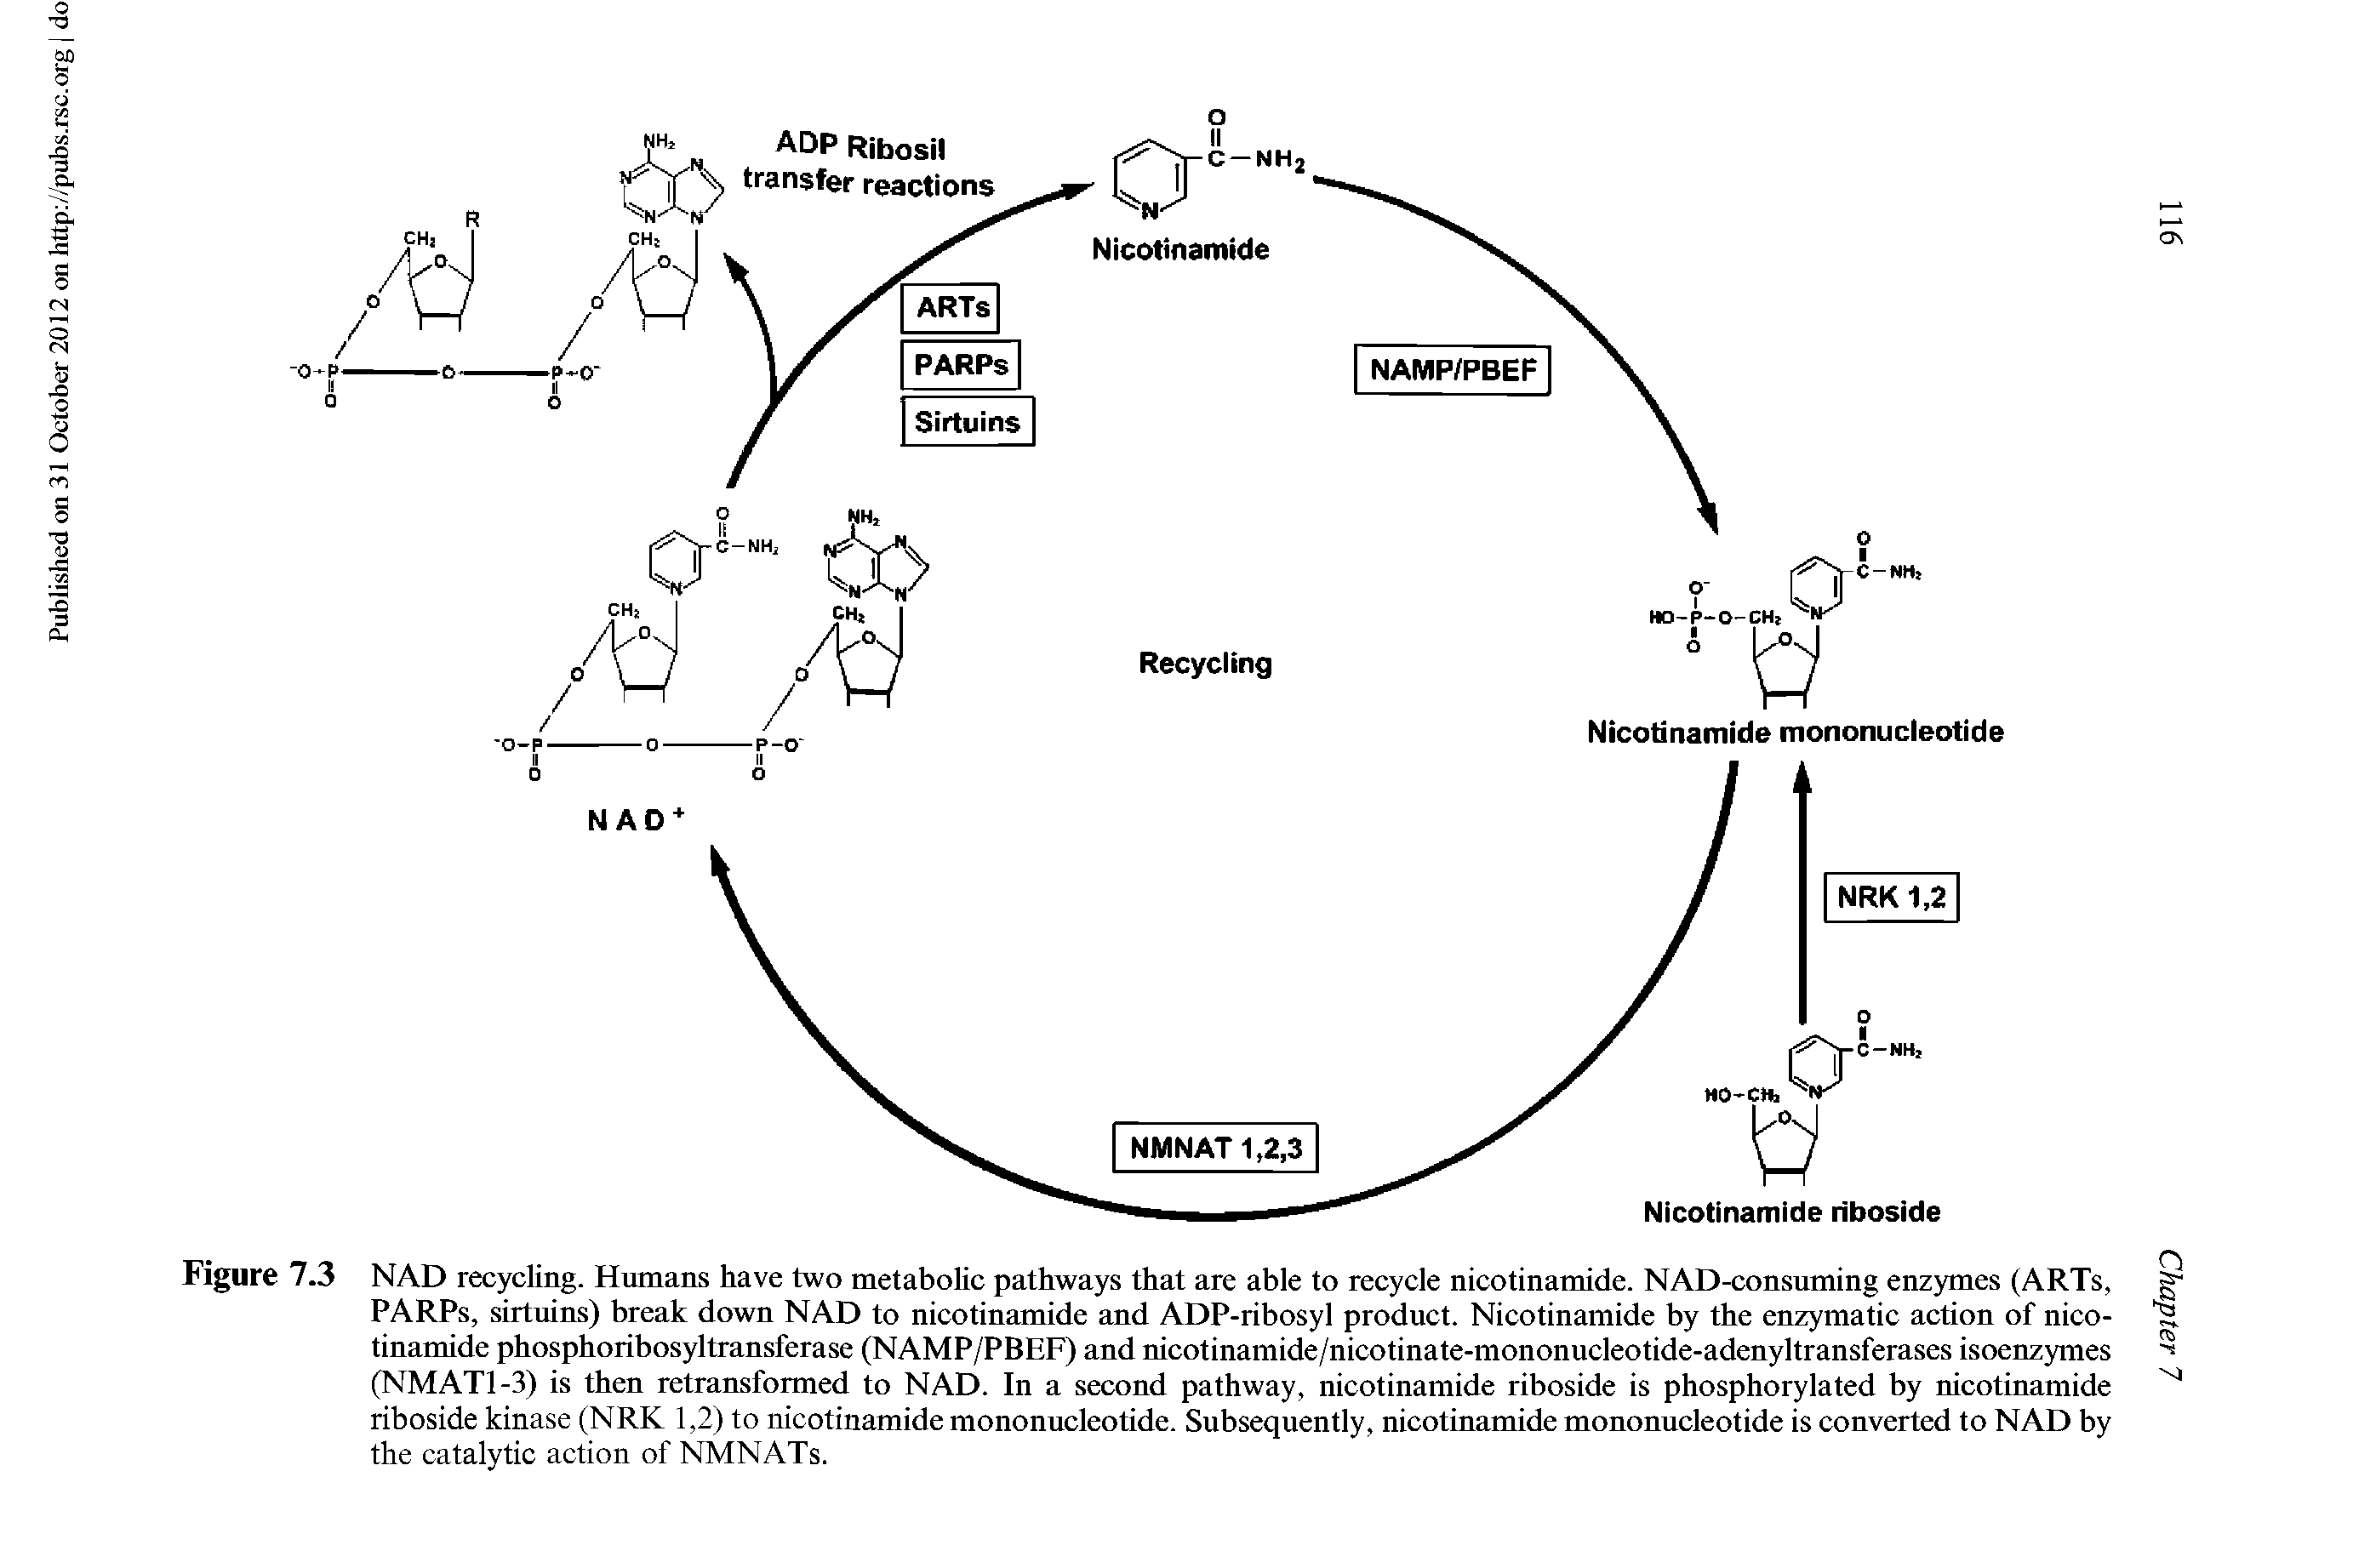 Figure 7.3 NAD recycling. Humans have two metabolic pathways that are able to recycle nicotinamide. NAD-consuming enzymes (ARTs, PARPs, sirtuins) break down NAD to nicotinamide and ADP-ribosyl product. Nicotinamide by the enzymatic action of nicotinamide phosphoribosyltransferase (NAMP/PBEF) and nicotinamide/nicotinate-mononucleotide-adenyltransferases isoenzymes (NMATl-3) is then retransformed to NAD. In a second pathway, nicotinamide riboside is phosphorylated by nicotinamide riboside kinase (NRK 1,2) to nicotinamide mononucleotide. Subsequently, nicotinamide mononucleotide is converted to NAD by the catalytic action of NMNATs.